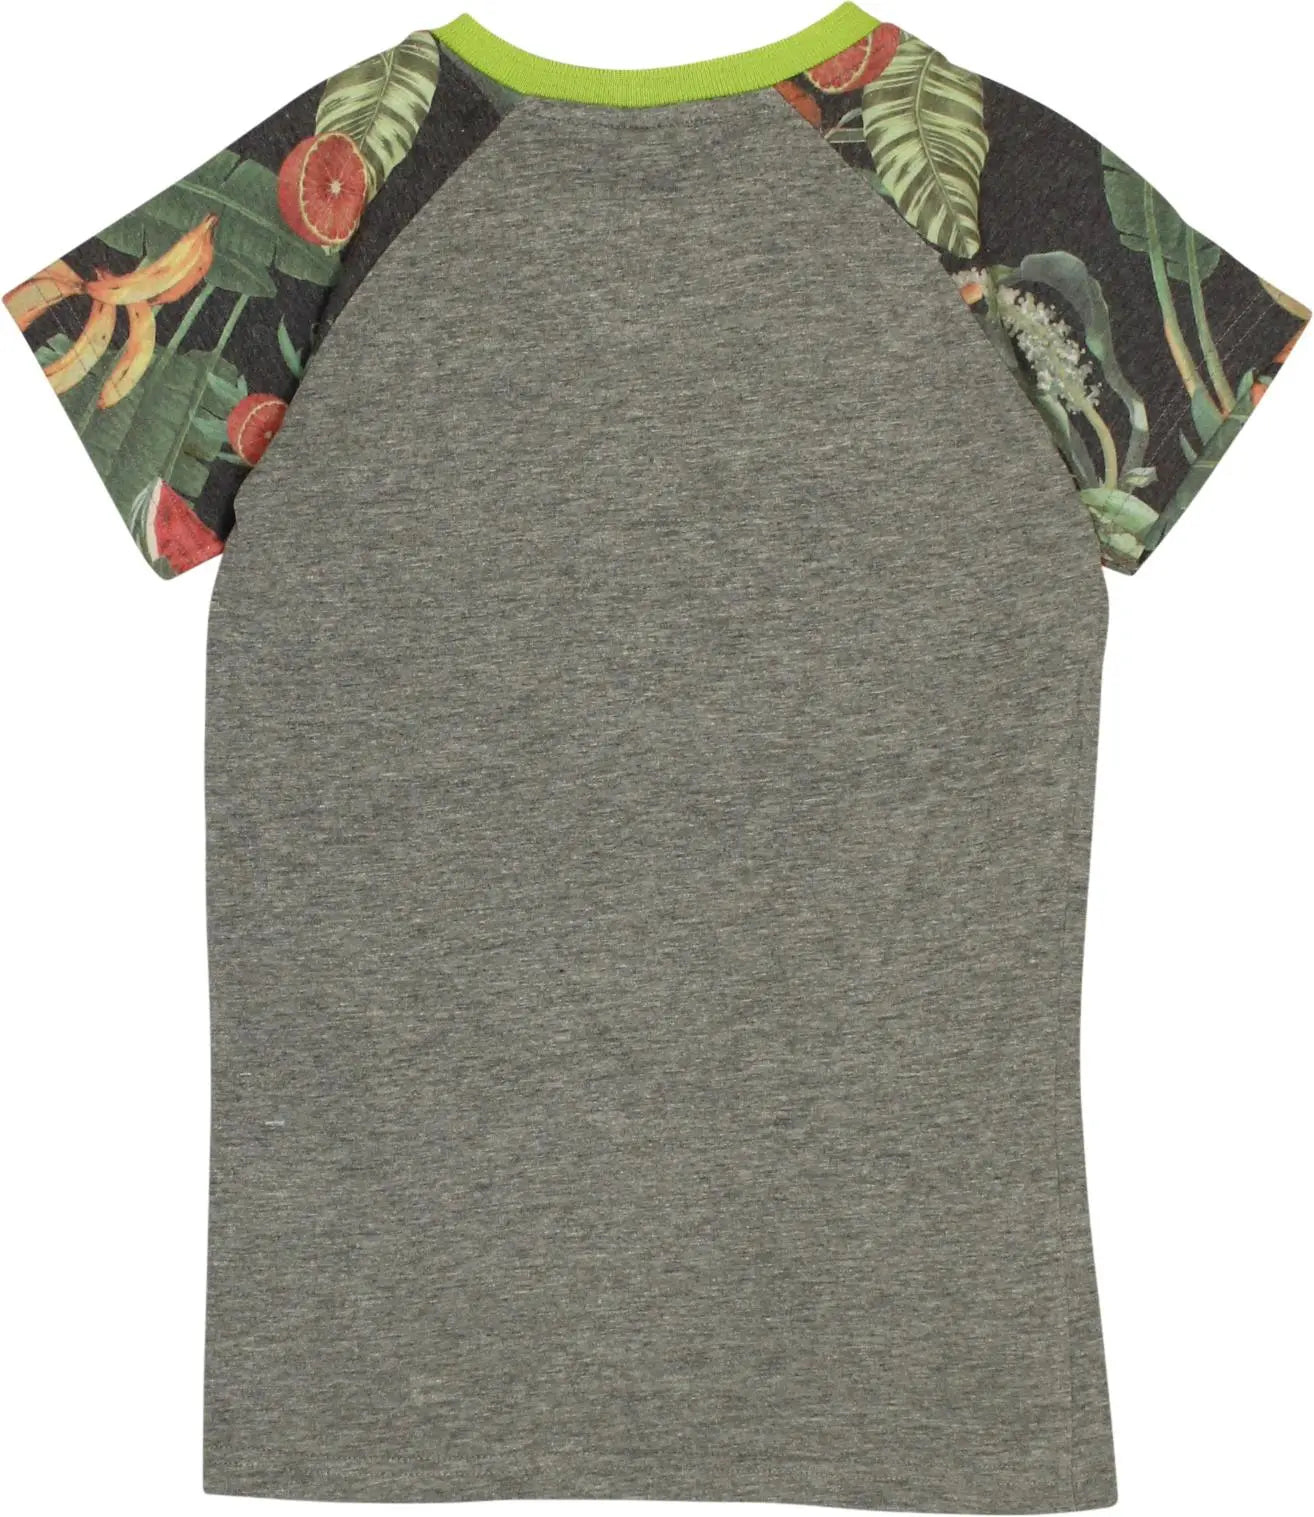 Scamps & Boys - Grey T-shirt- ThriftTale.com - Vintage and second handclothing